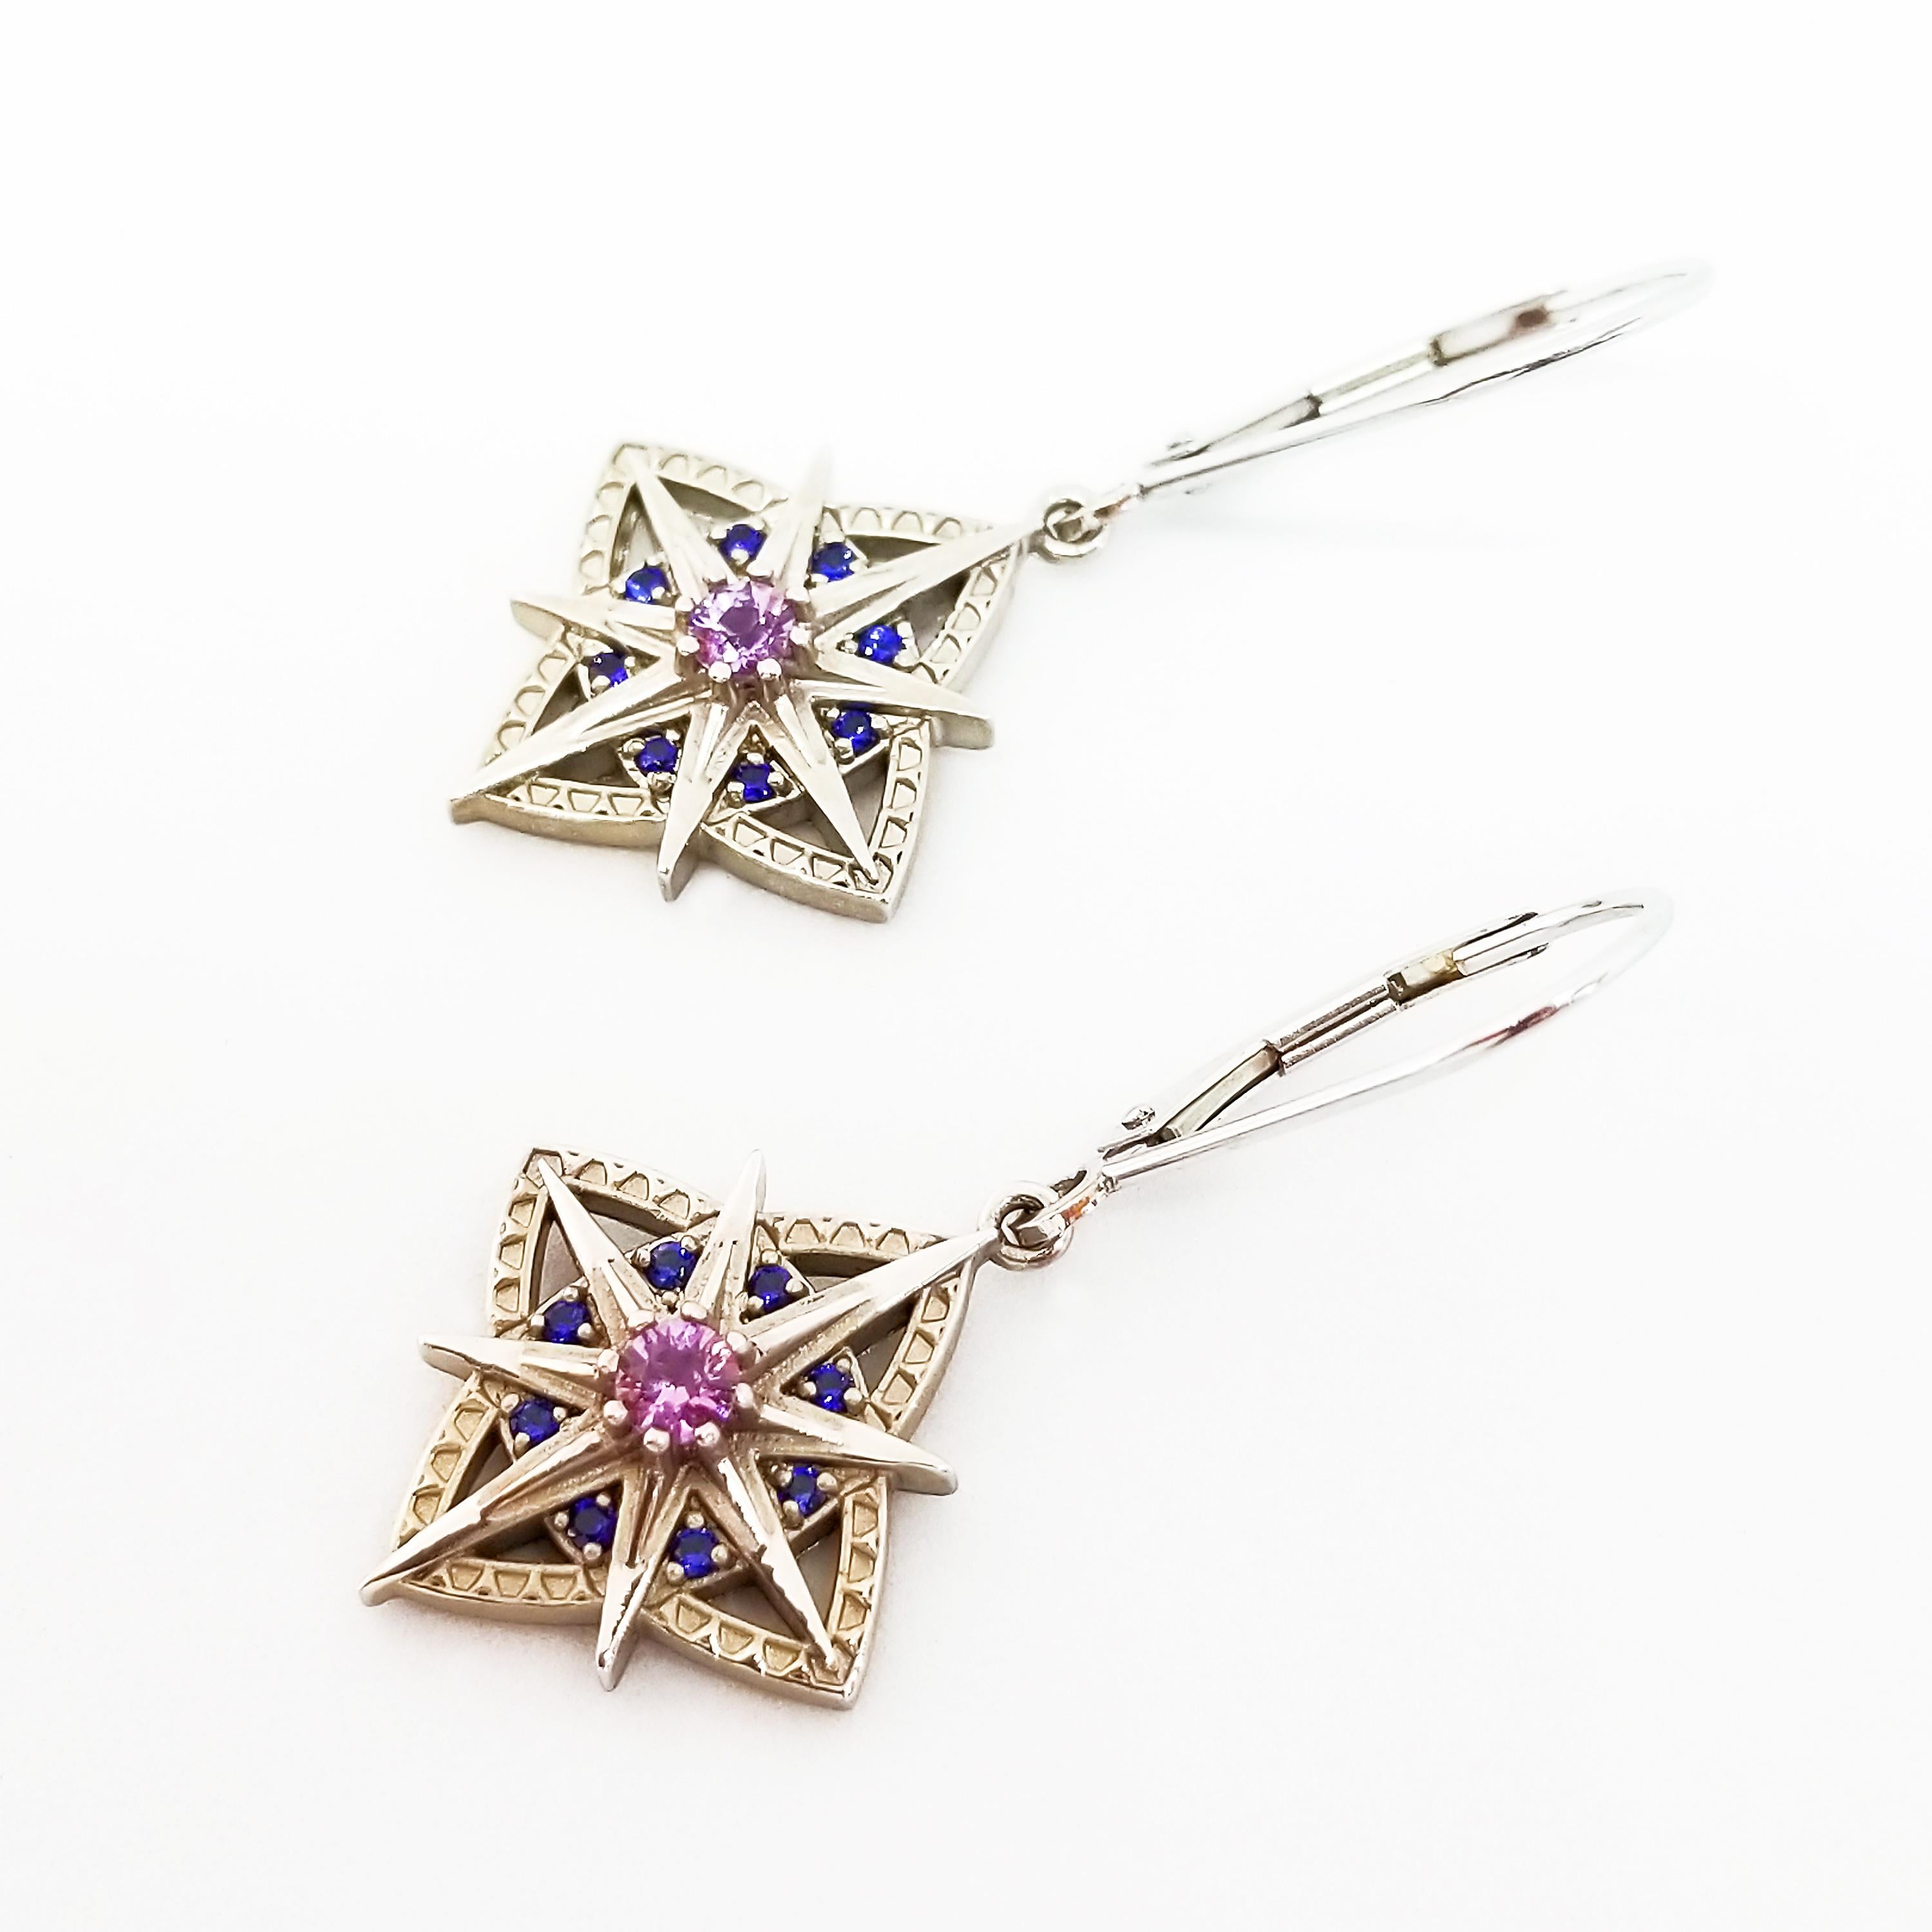 These Antique or Nautical Style Star Earrings feature eight pointed, Antique Styled Stars, and four petal, Clover Shapes set with Round Brilliant Cut, AAA Sapphires of Blue and Purple Pink.  The two Gem Quality center Sapphires are a Brilliant